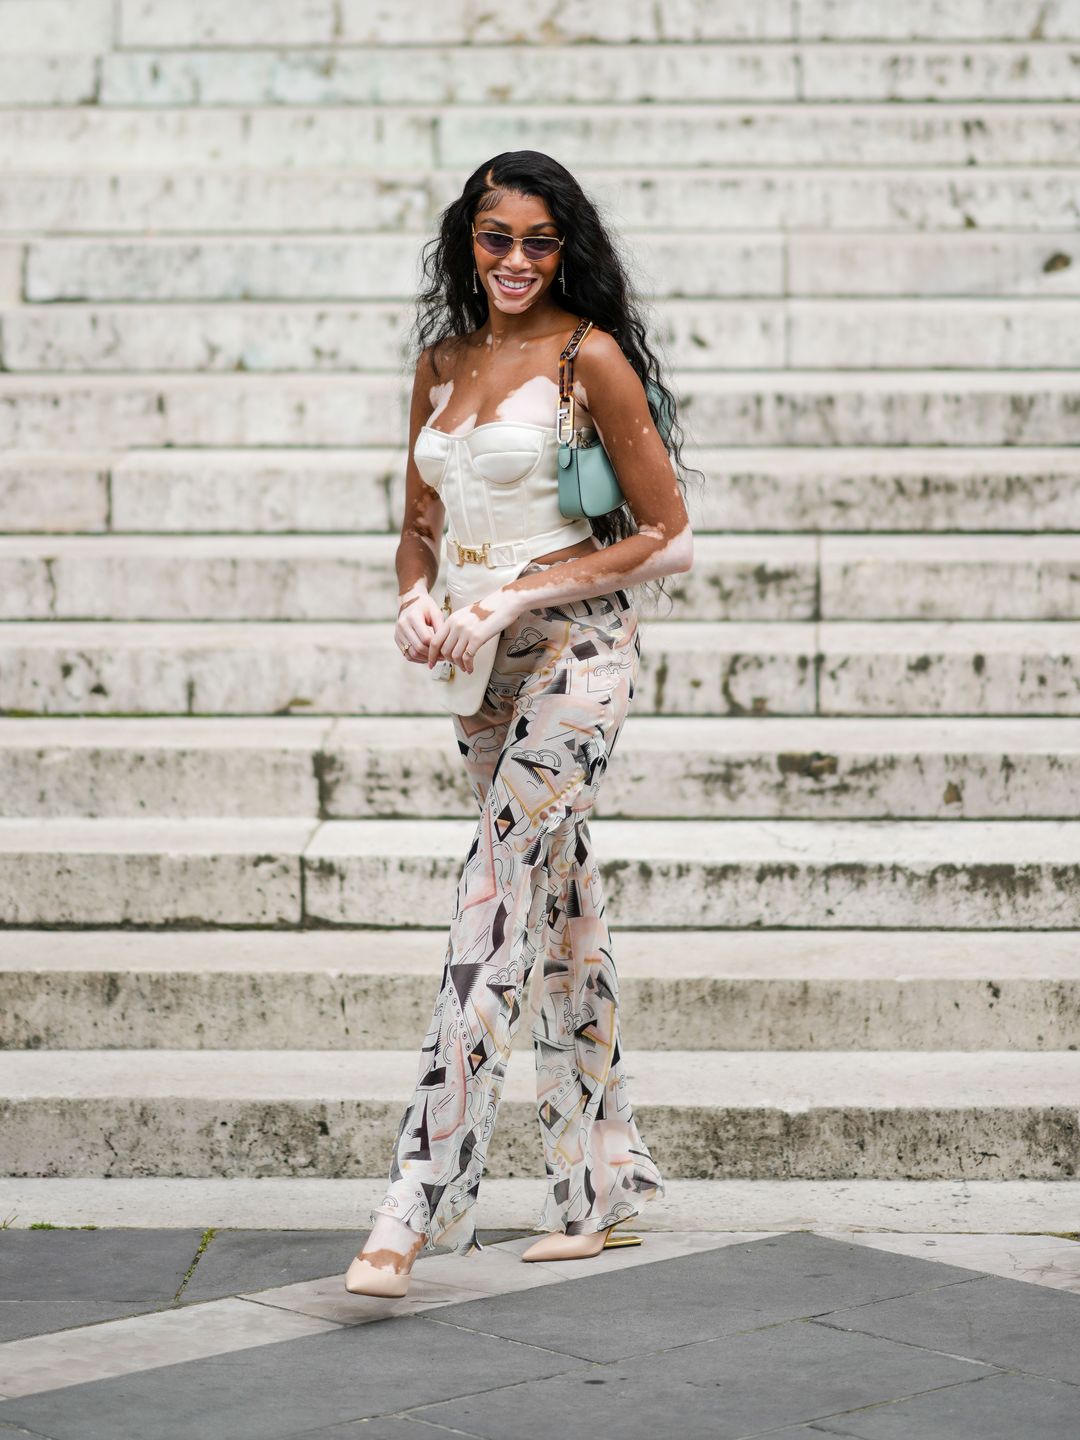 Winne Harlow wearing a corset and printed trousers